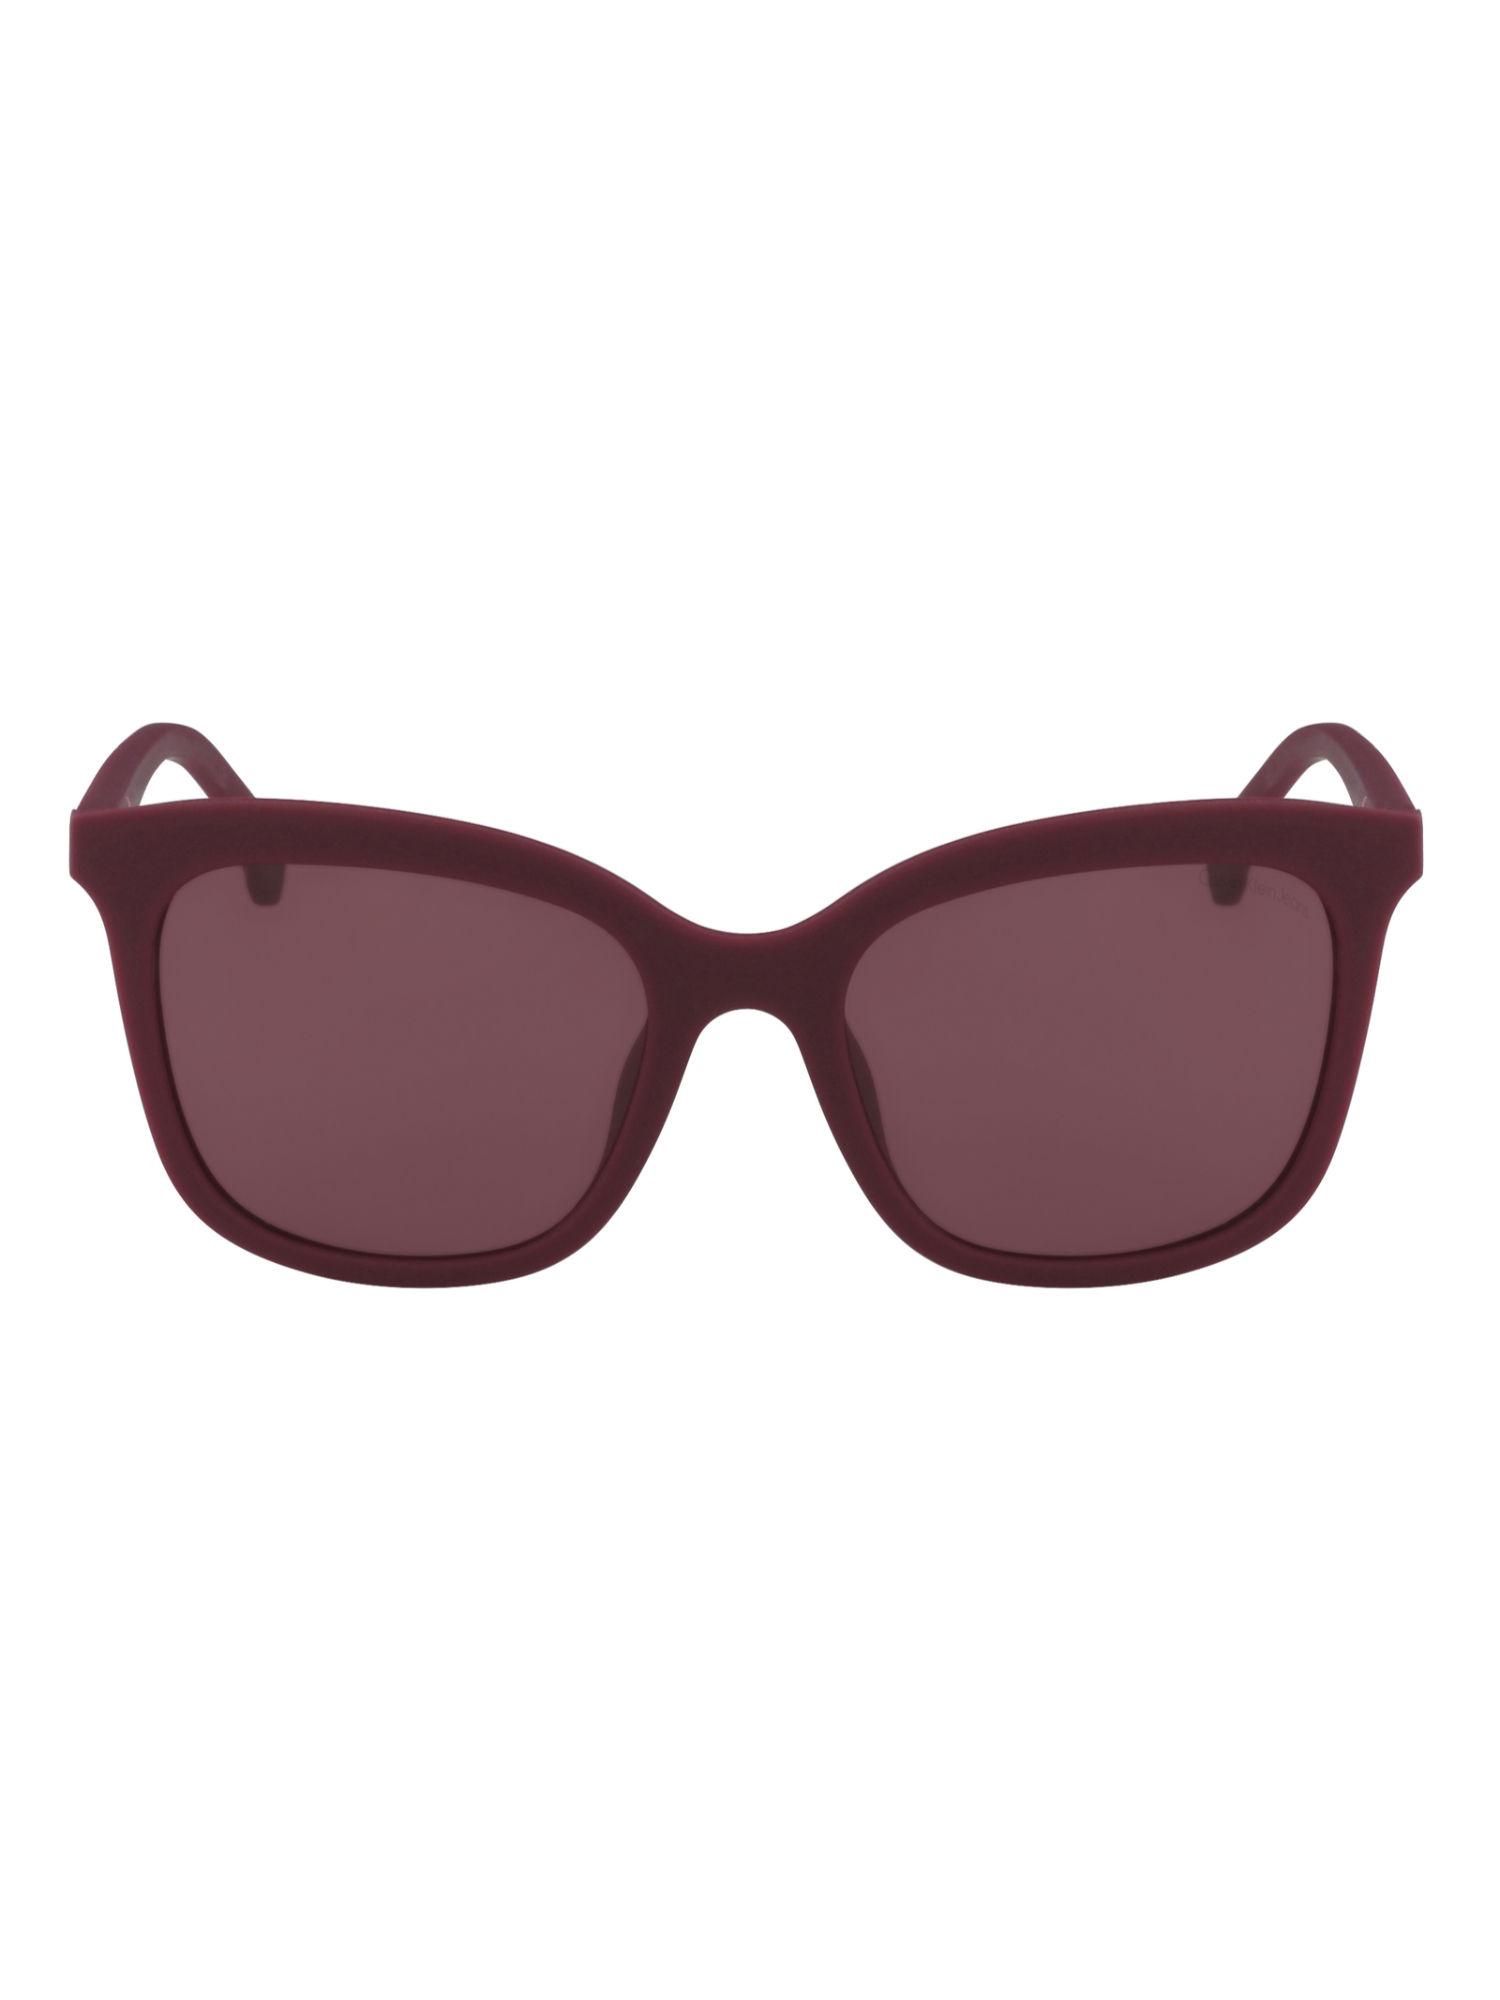 square sunglasses with maroon lens for men